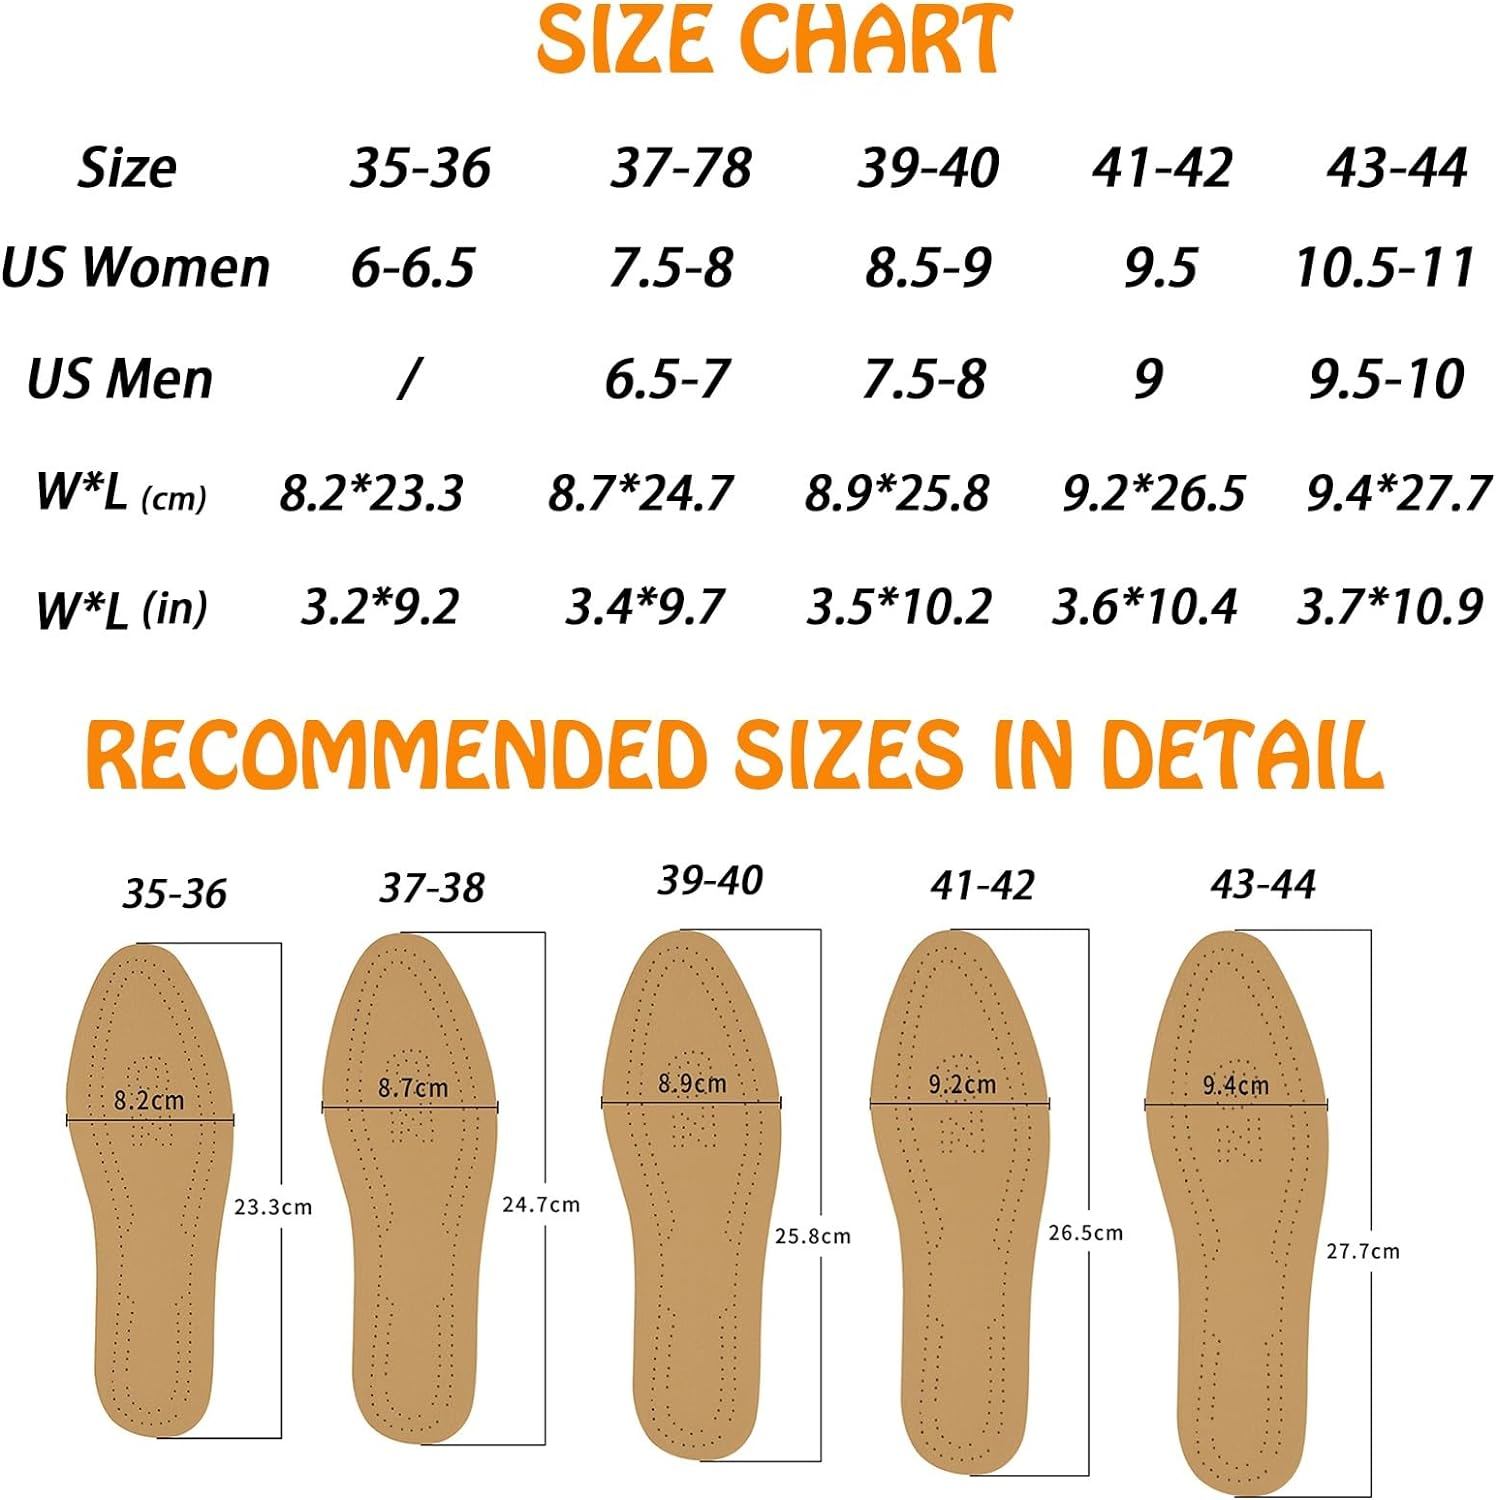 Supination Insoles,O/XO Leg Orthopedic Corrective Brown Insoles,for Foot Alignment,Metatarsalgia,Bow Legs,Posture Improve,Pronation Correction Insoles for Men and Women(Color: Supination,Size: 41/42)